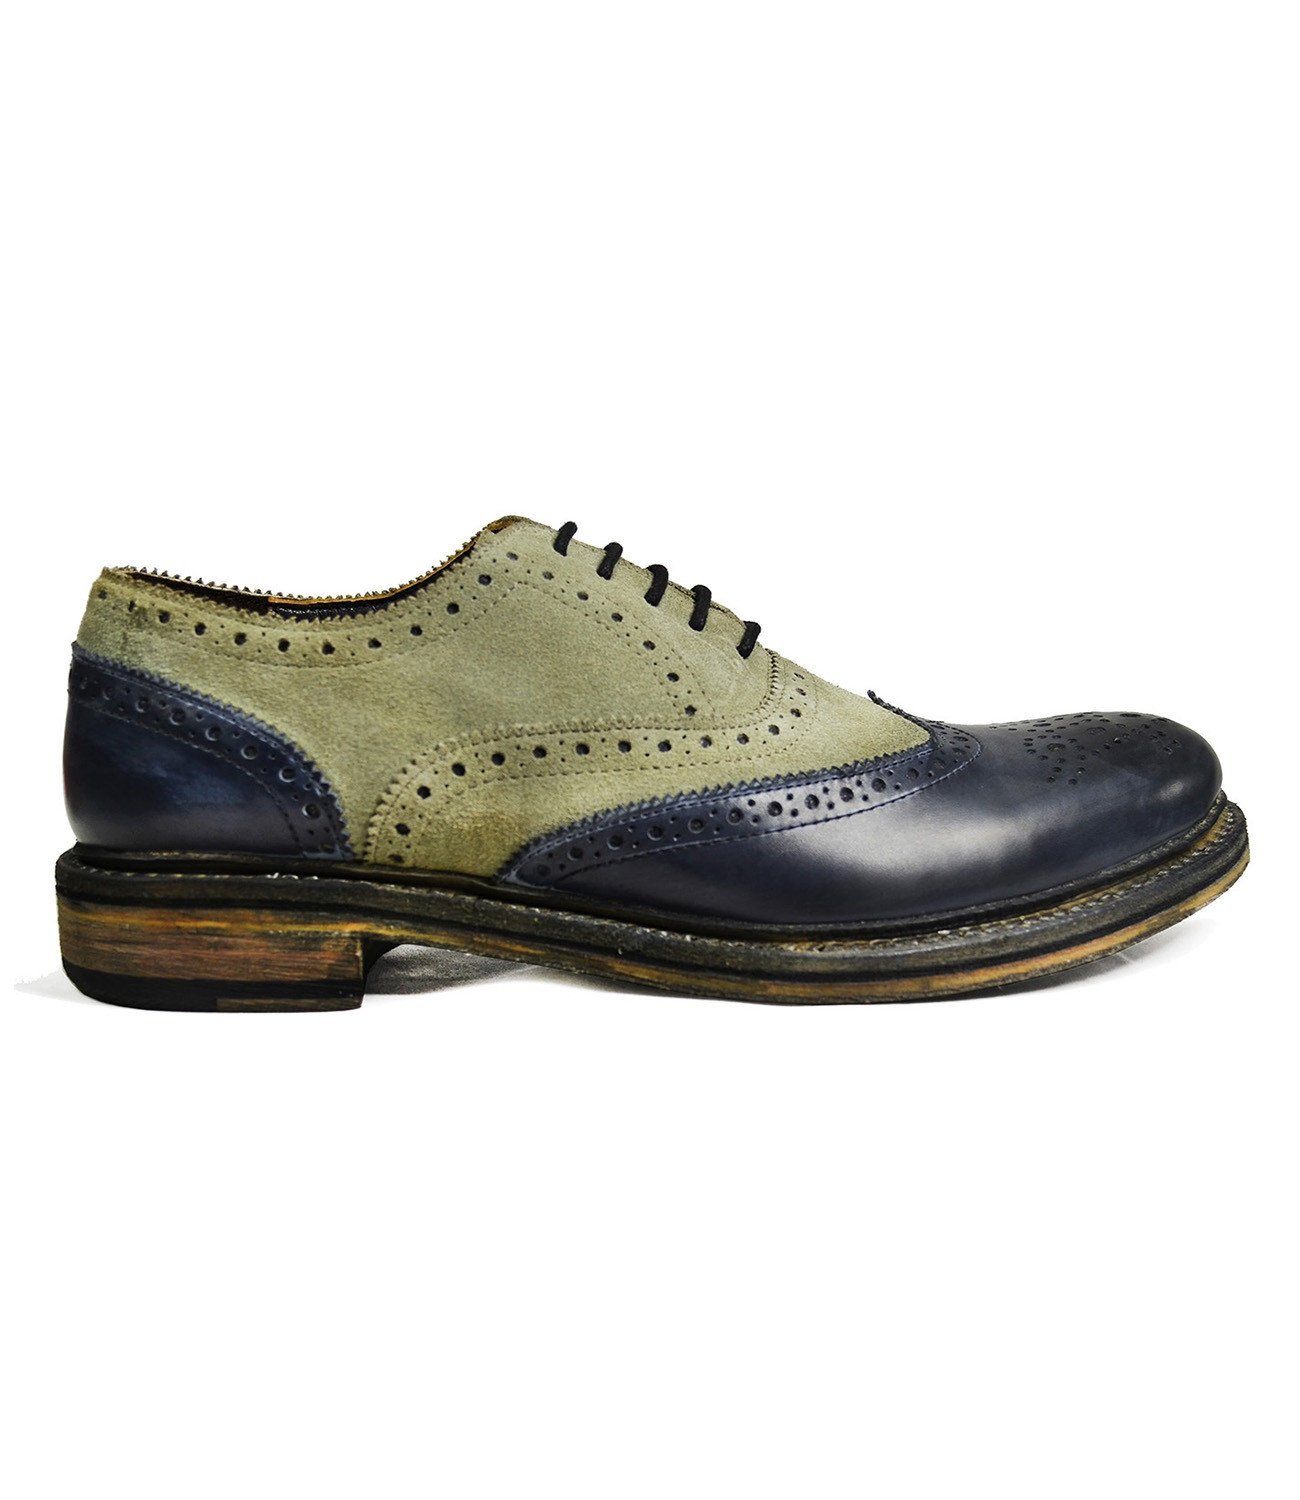 VERONA Full Leather Grey and Navy Wing Tip Oxfords | Paul Malone